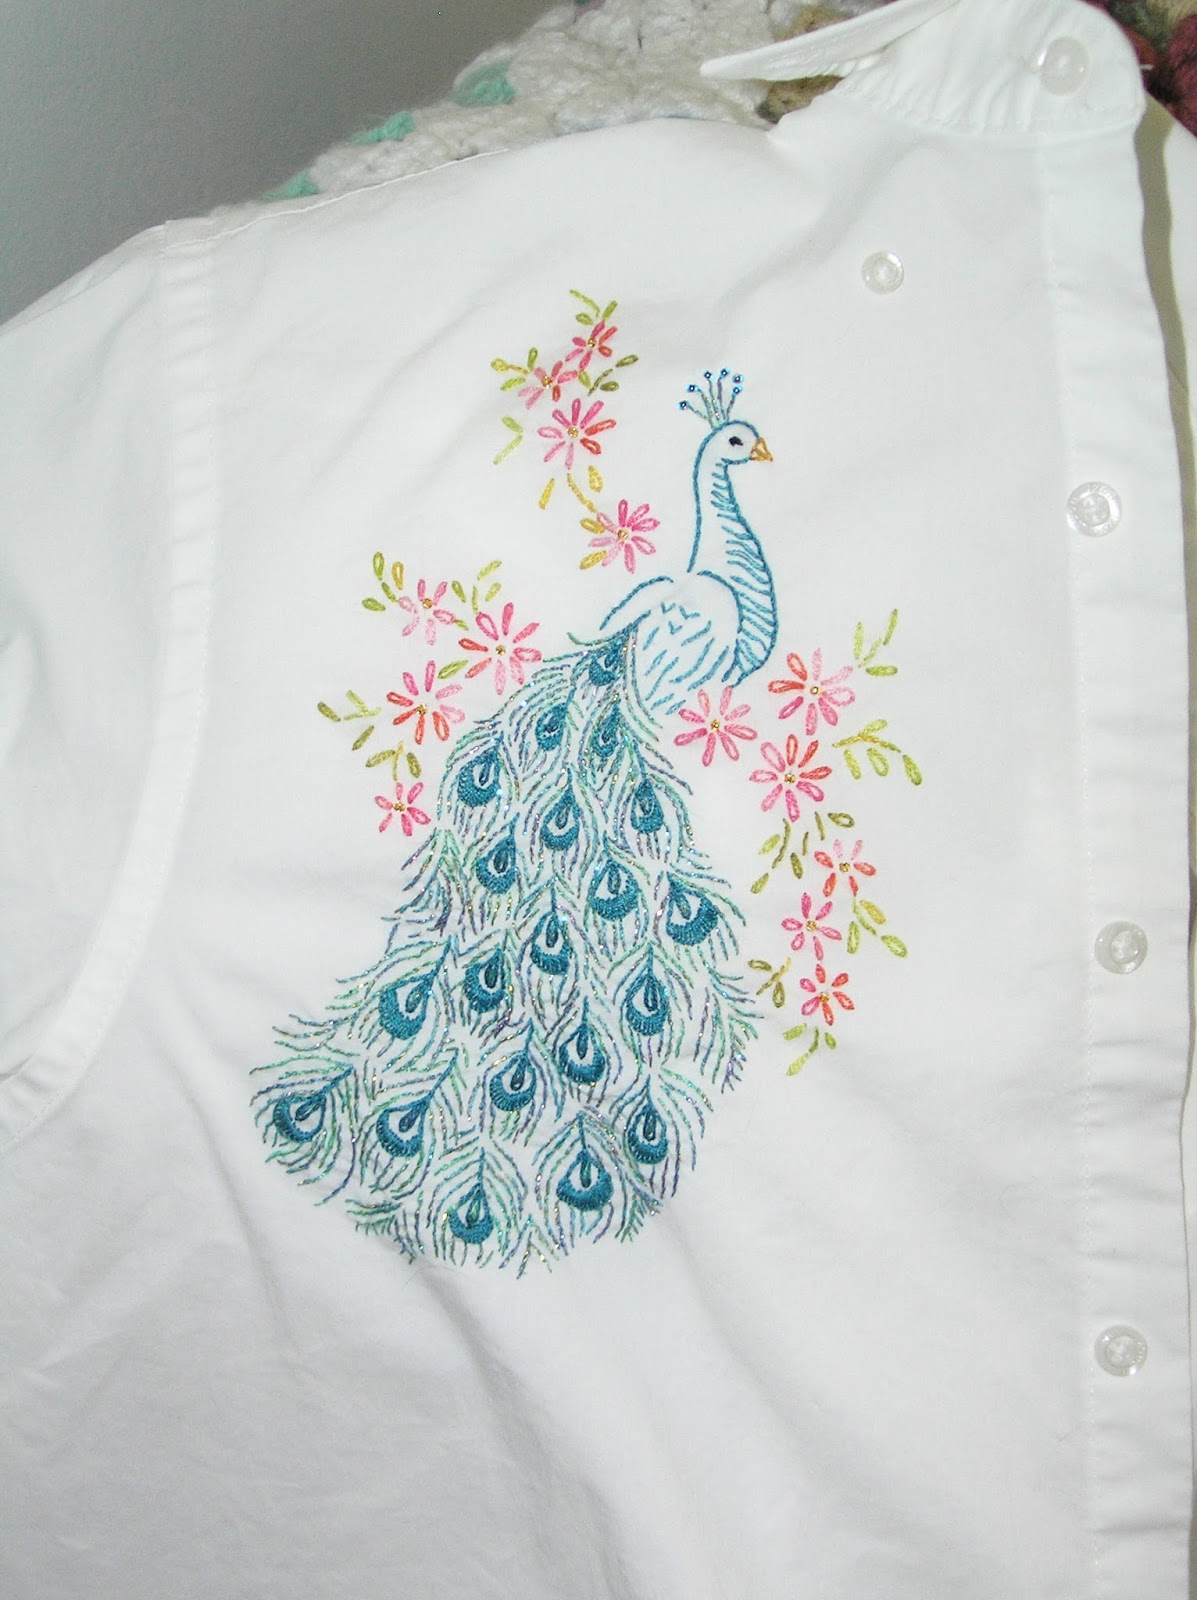 Dmc Embroidery Patterns Kitty And Me Designs Peacock Embroidery Pattern